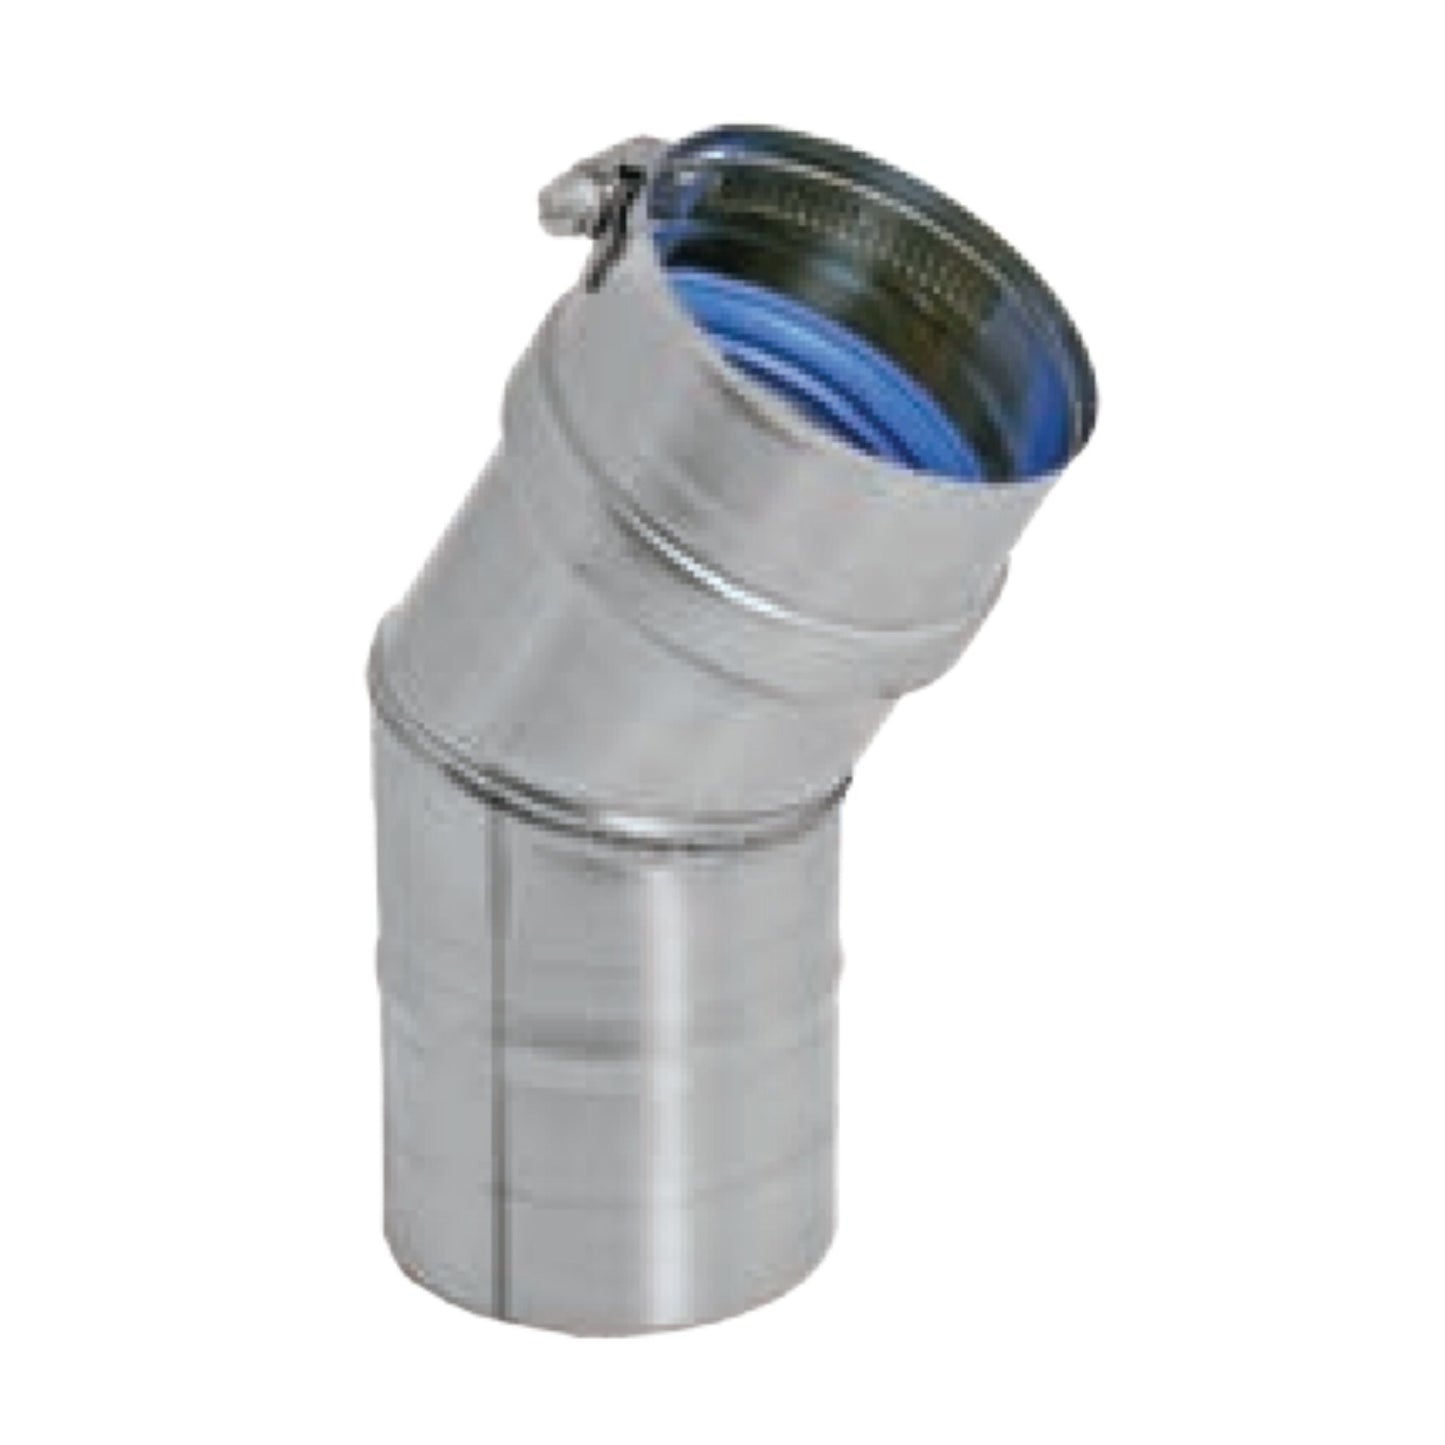 DuraVent FasNSeal 9" 30 Degree 316L Stainless Steel Elbow